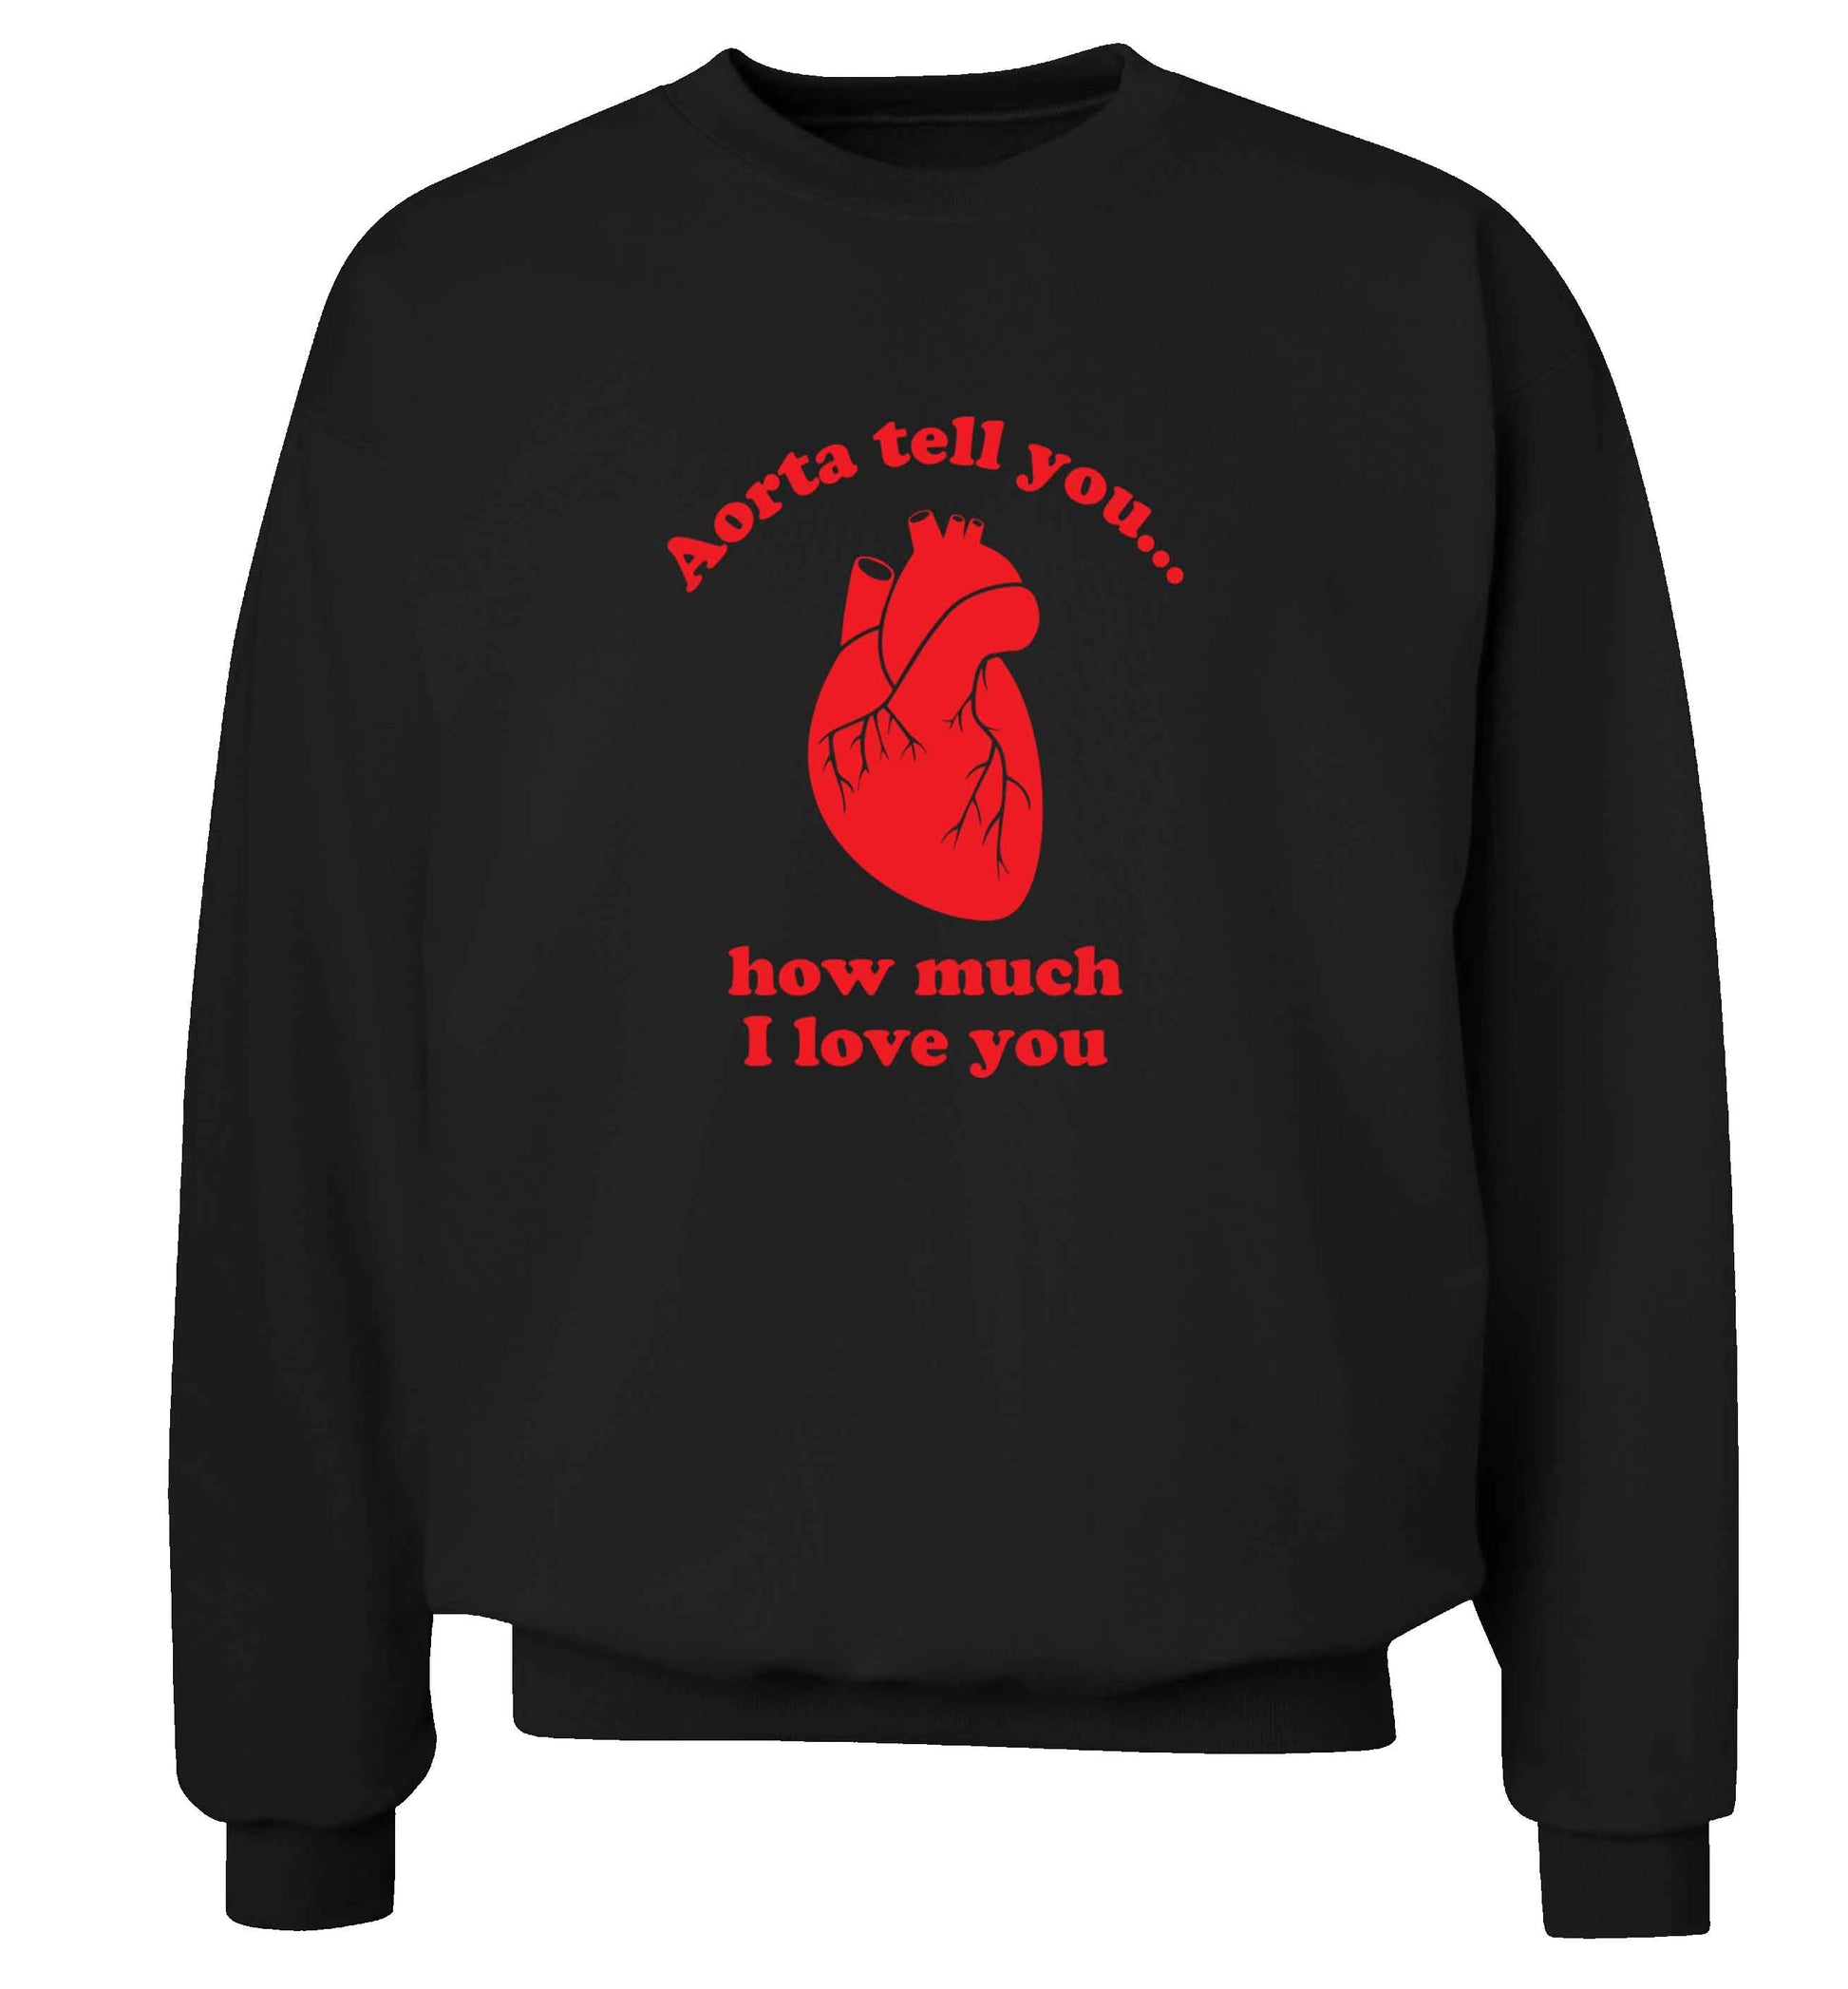 Aorta tell you how much I love you adult's unisex black sweater 2XL